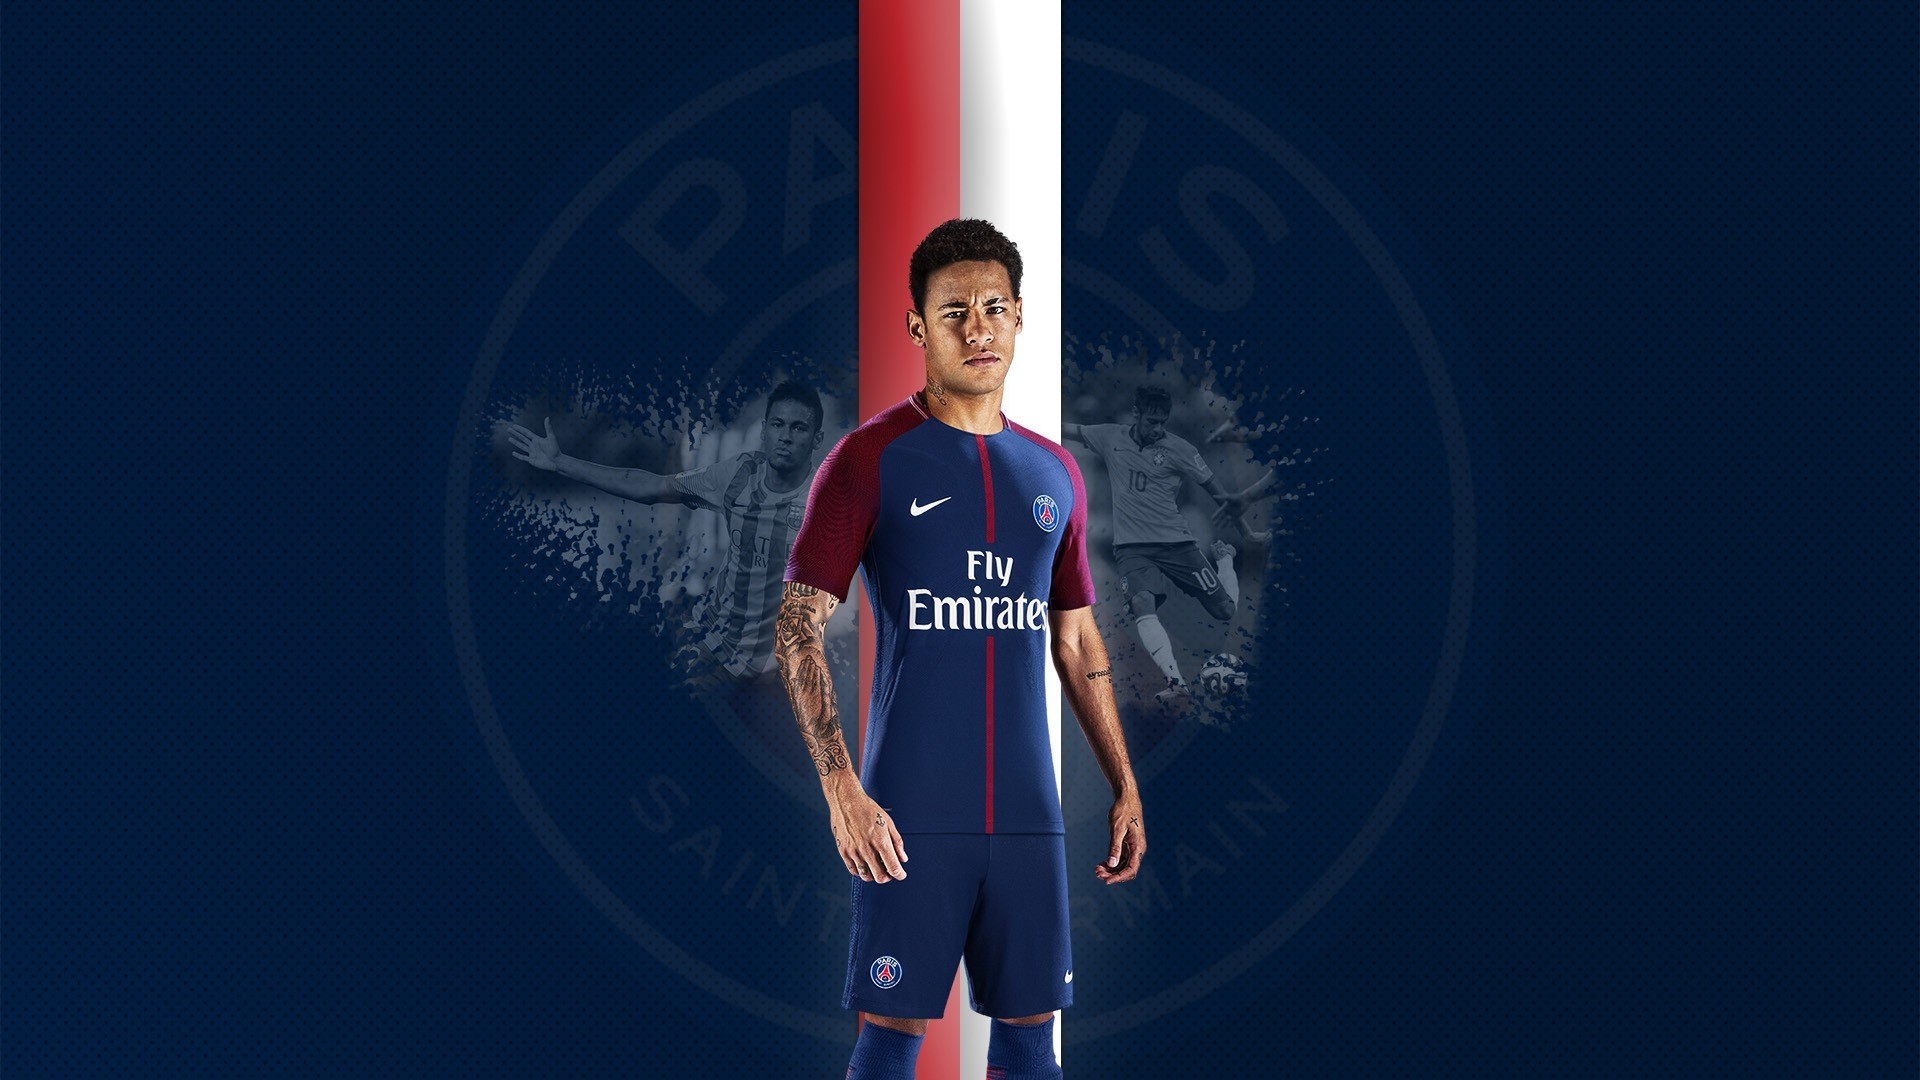 Neymar Desktop Wallpaper with image resolution 1920x1080 pixel. You can use this wallpaper as background for your desktop Computer Screensavers, Android or iPhone smartphones